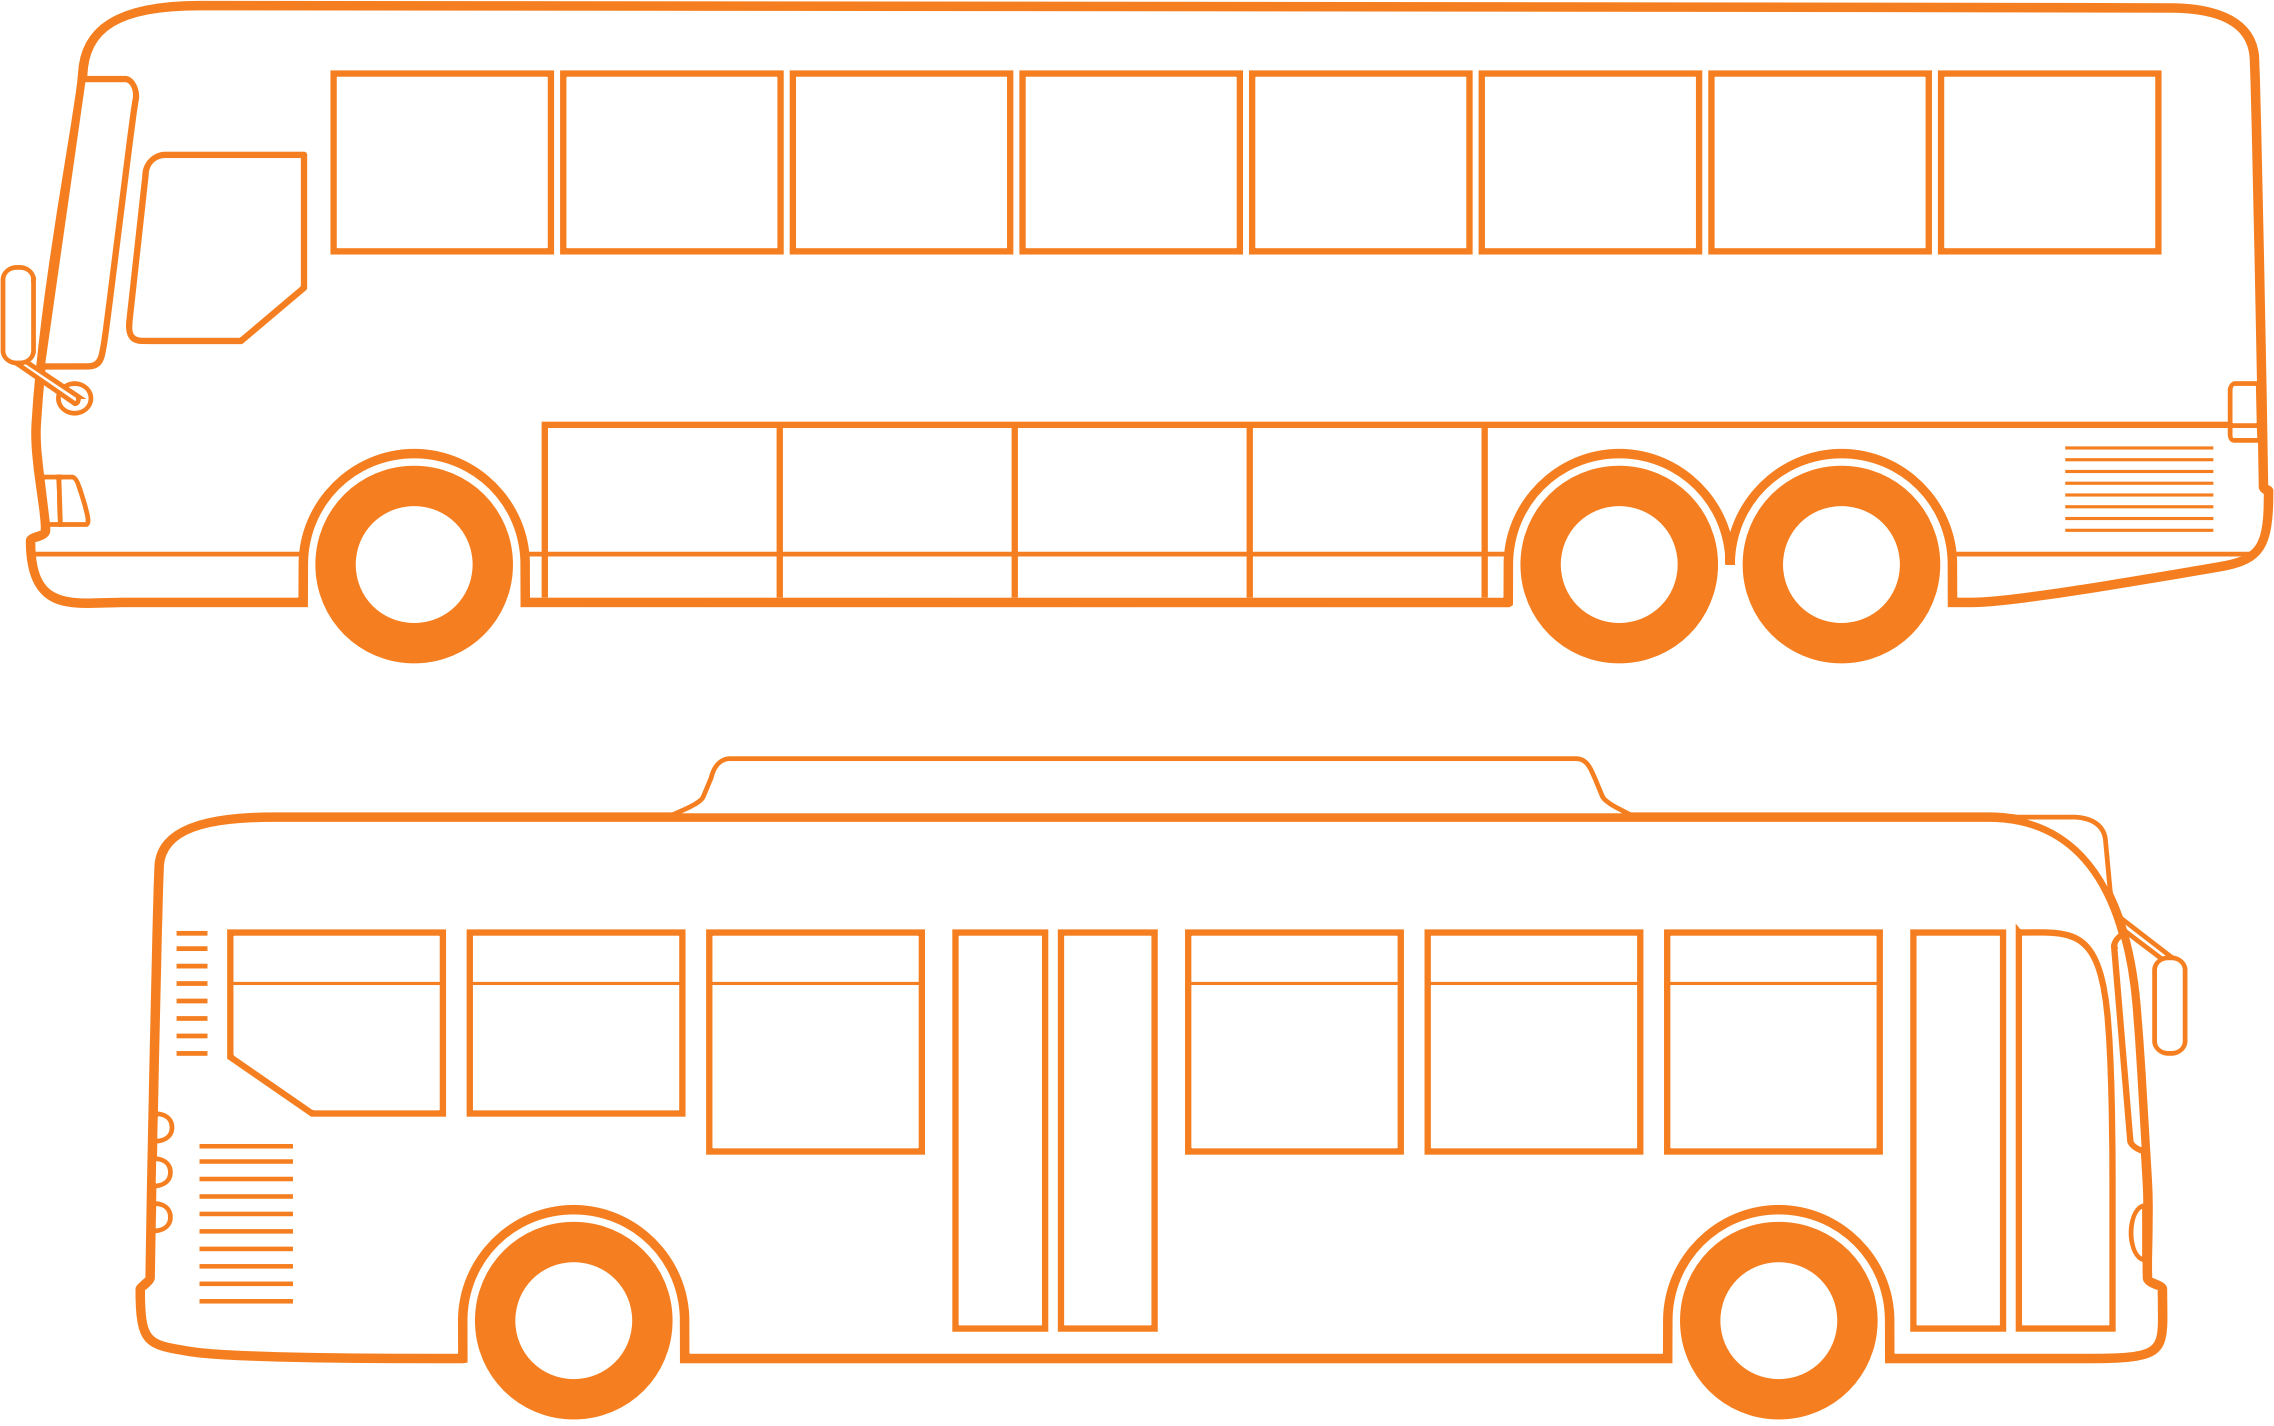 Country And City Busses - Bus (2274x1426)